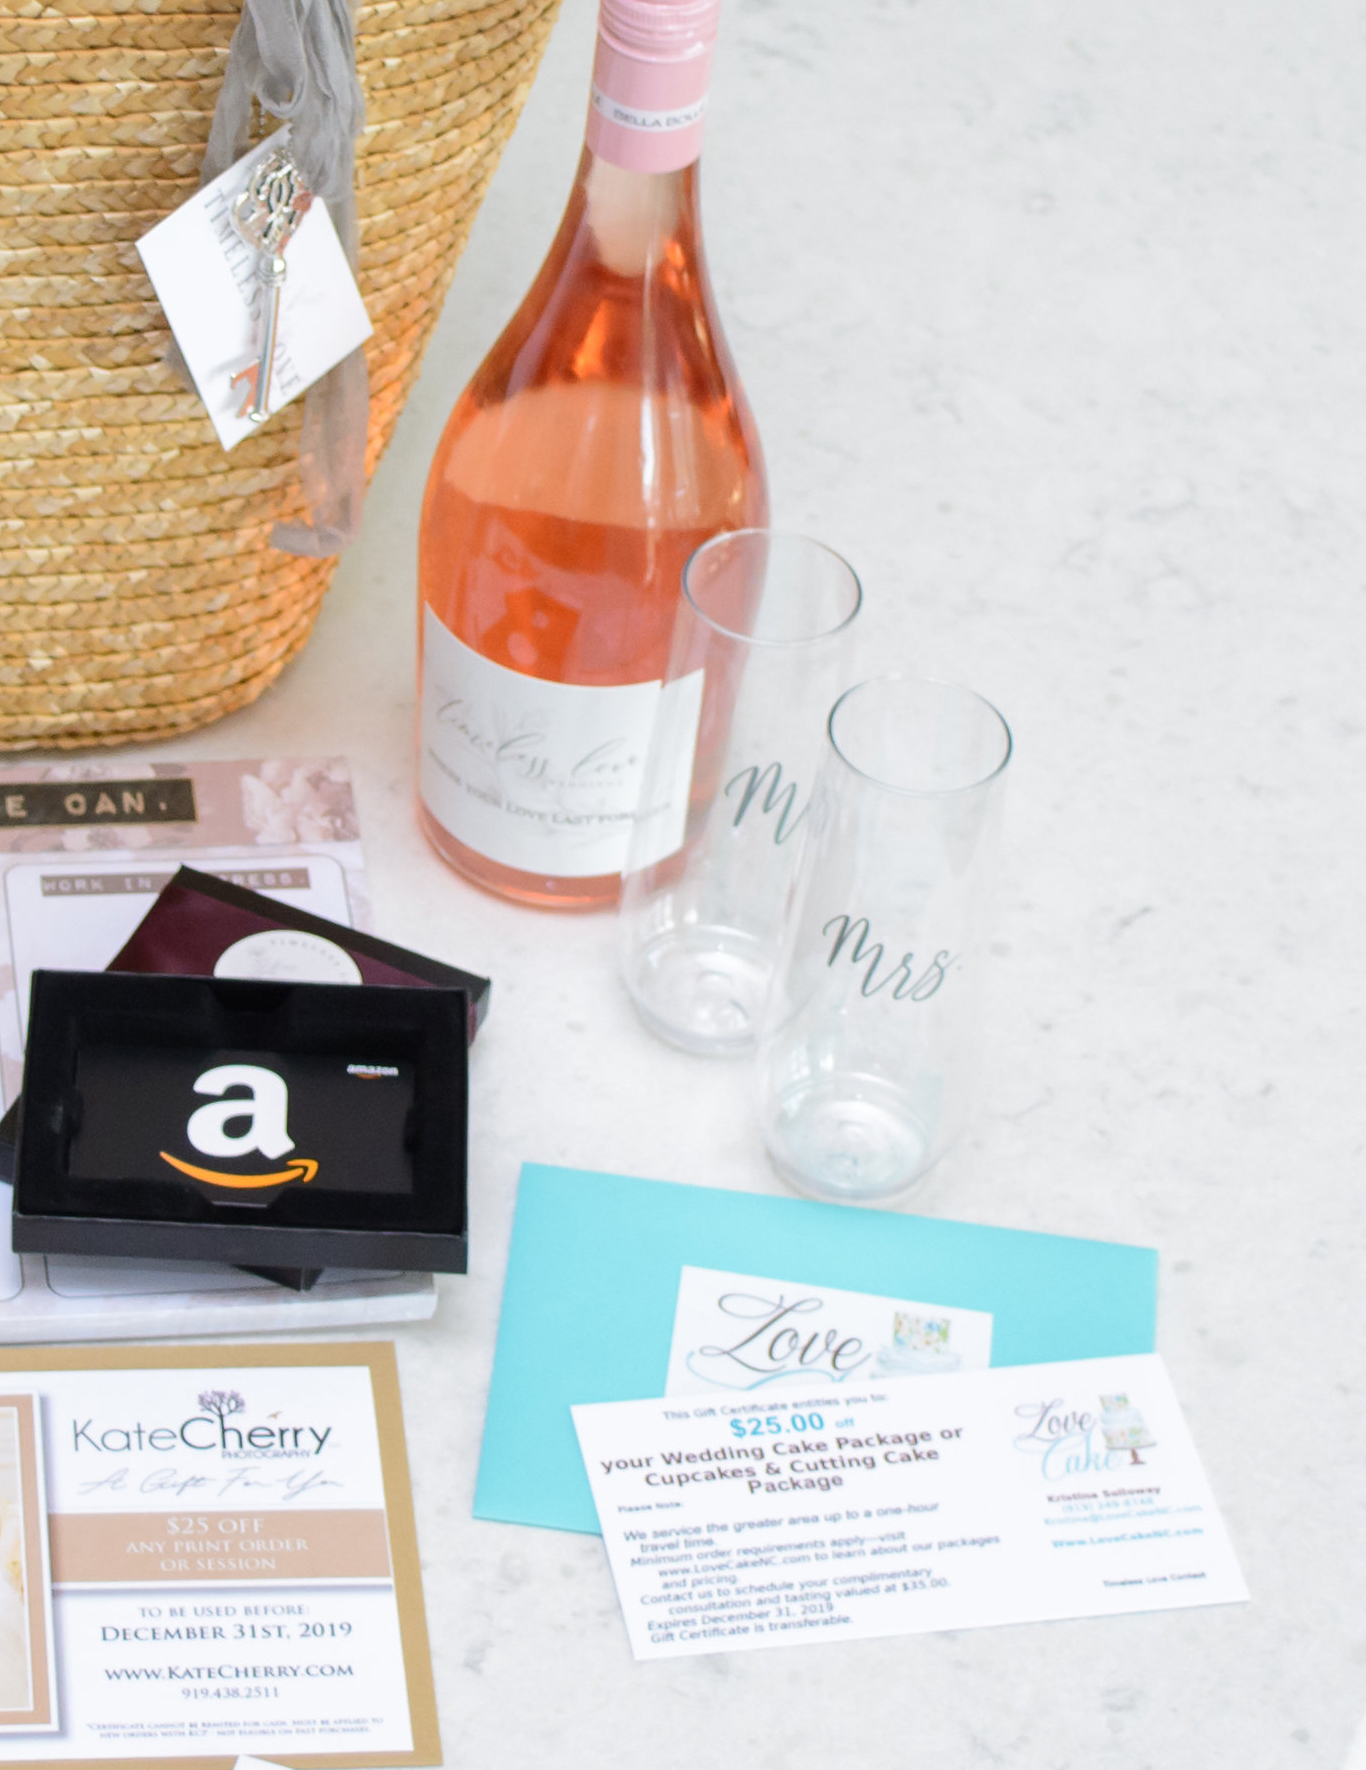 Timeless Love Weddings giveaway